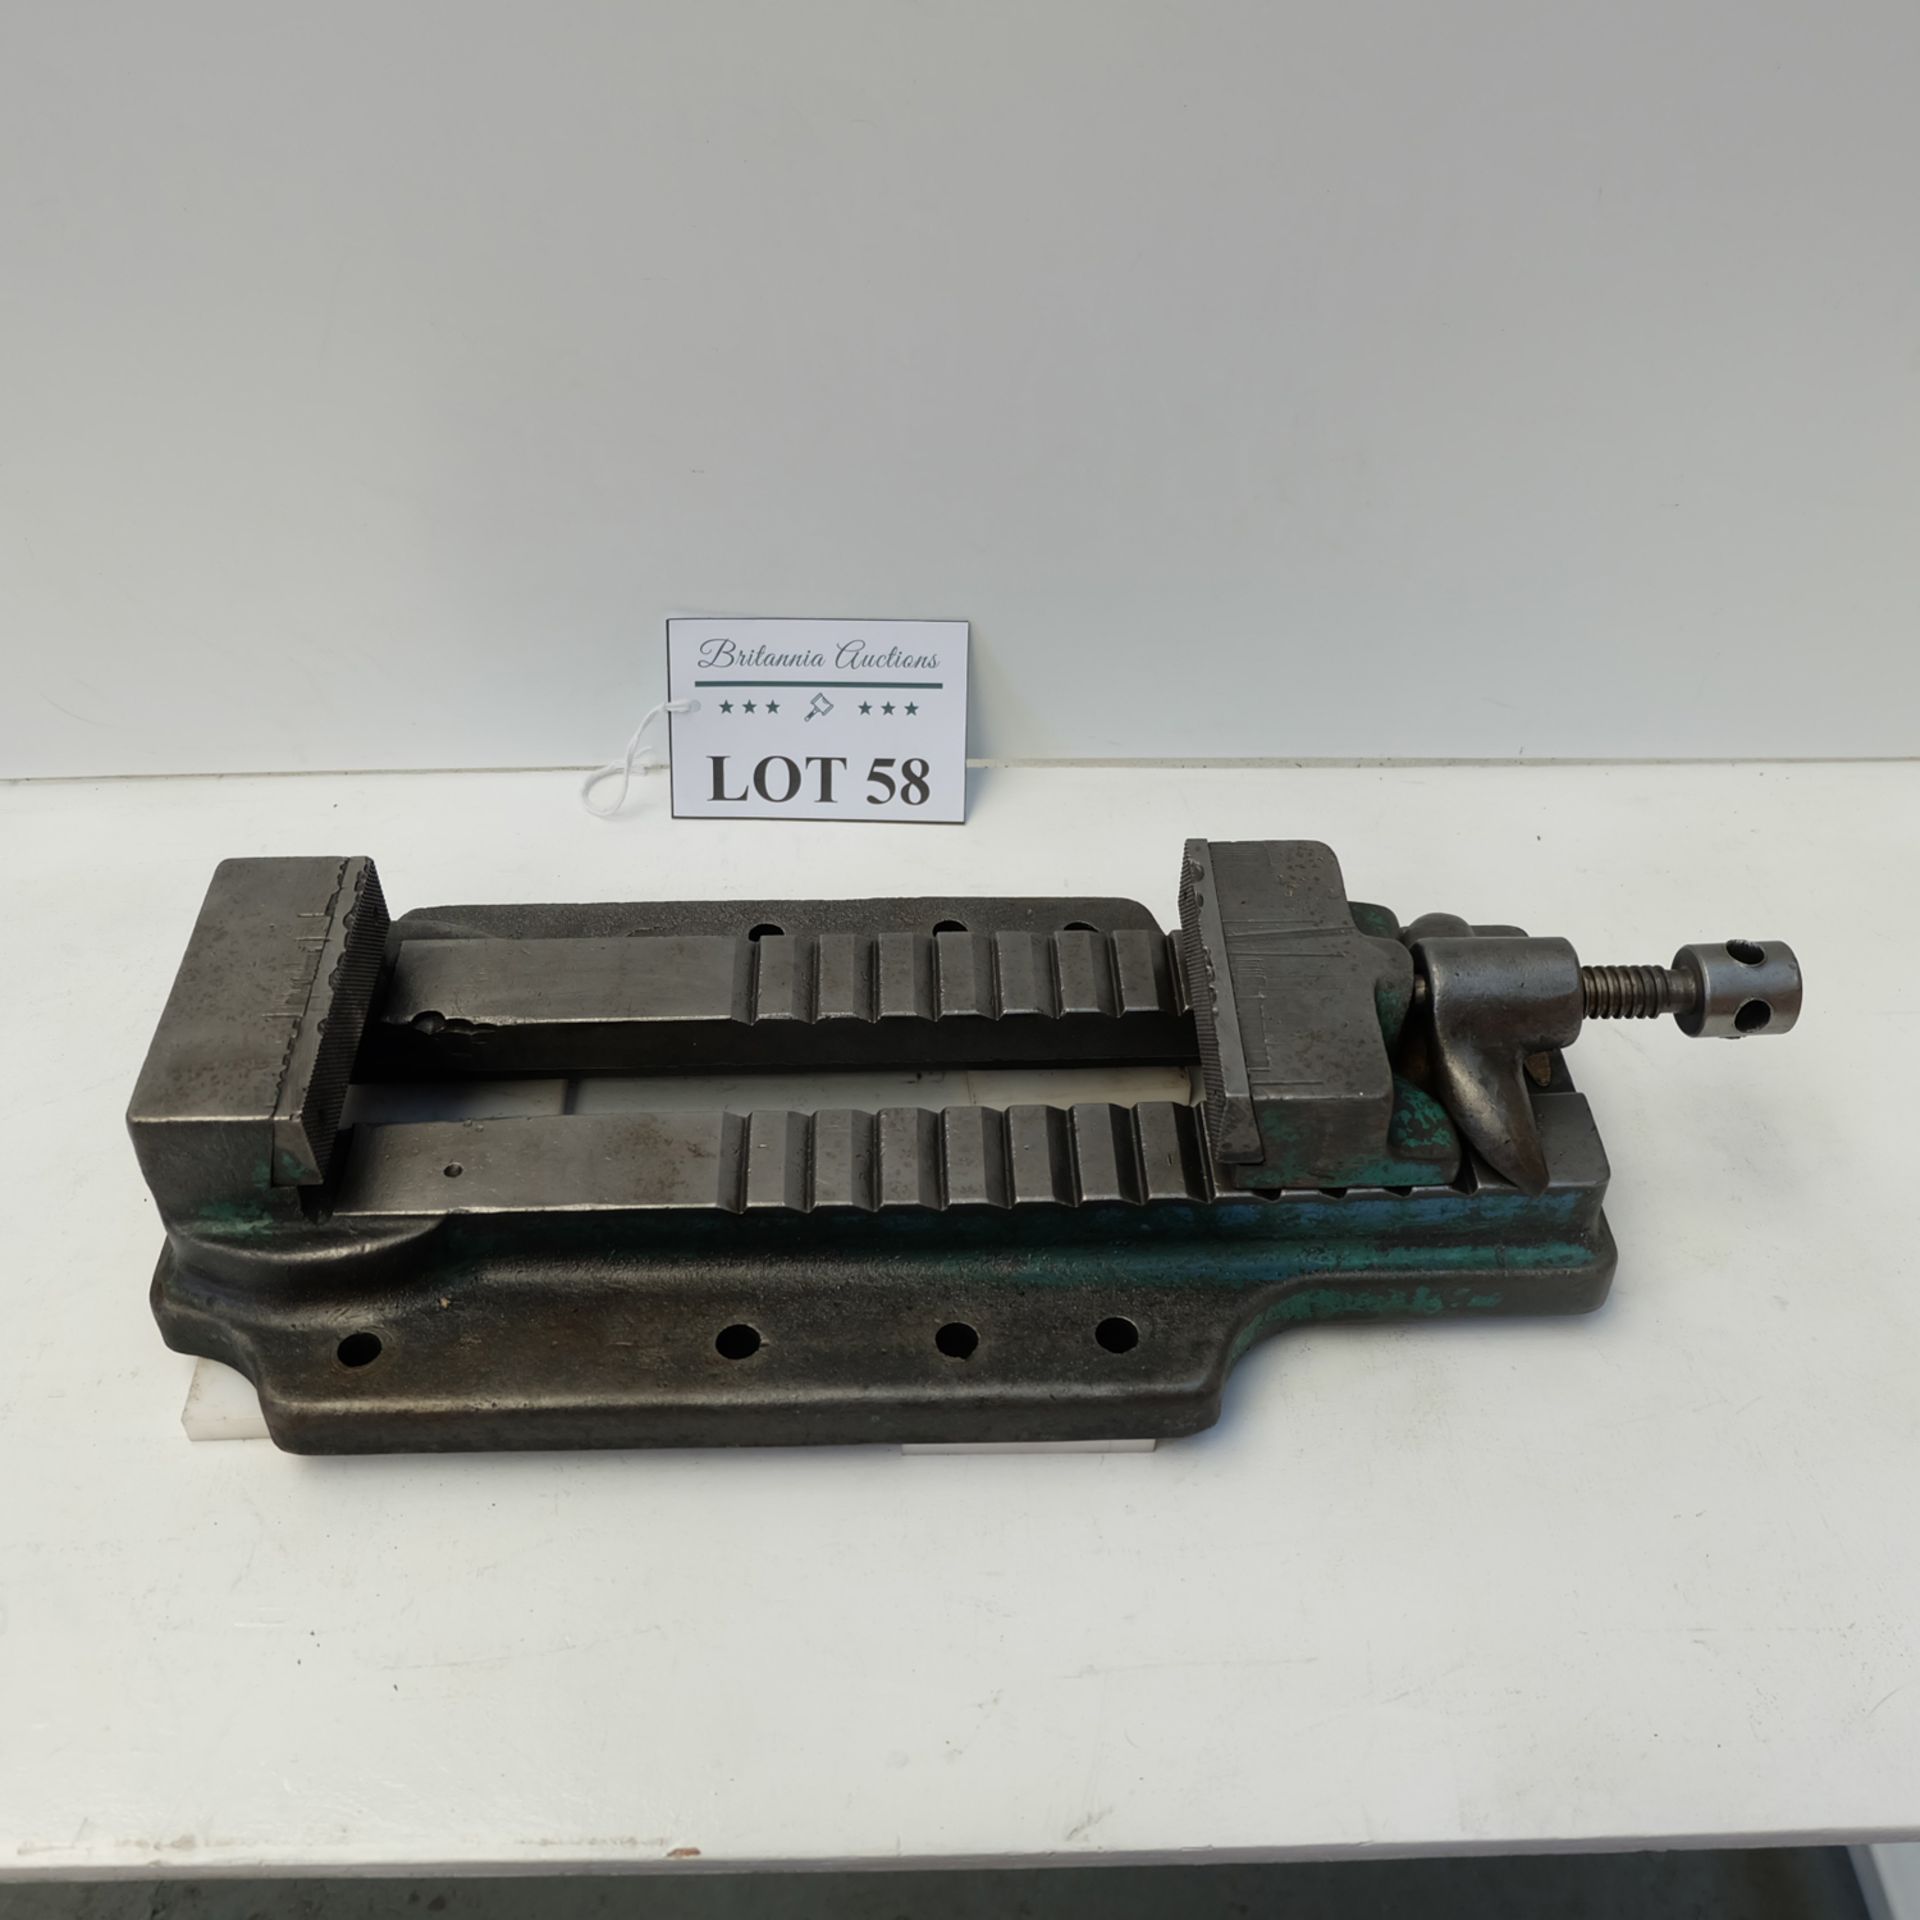 Charles Taylor Rack Vice. Jaw Width 5". Max Opening 11 1/2" Jaw Height 1 3/4" Approx.